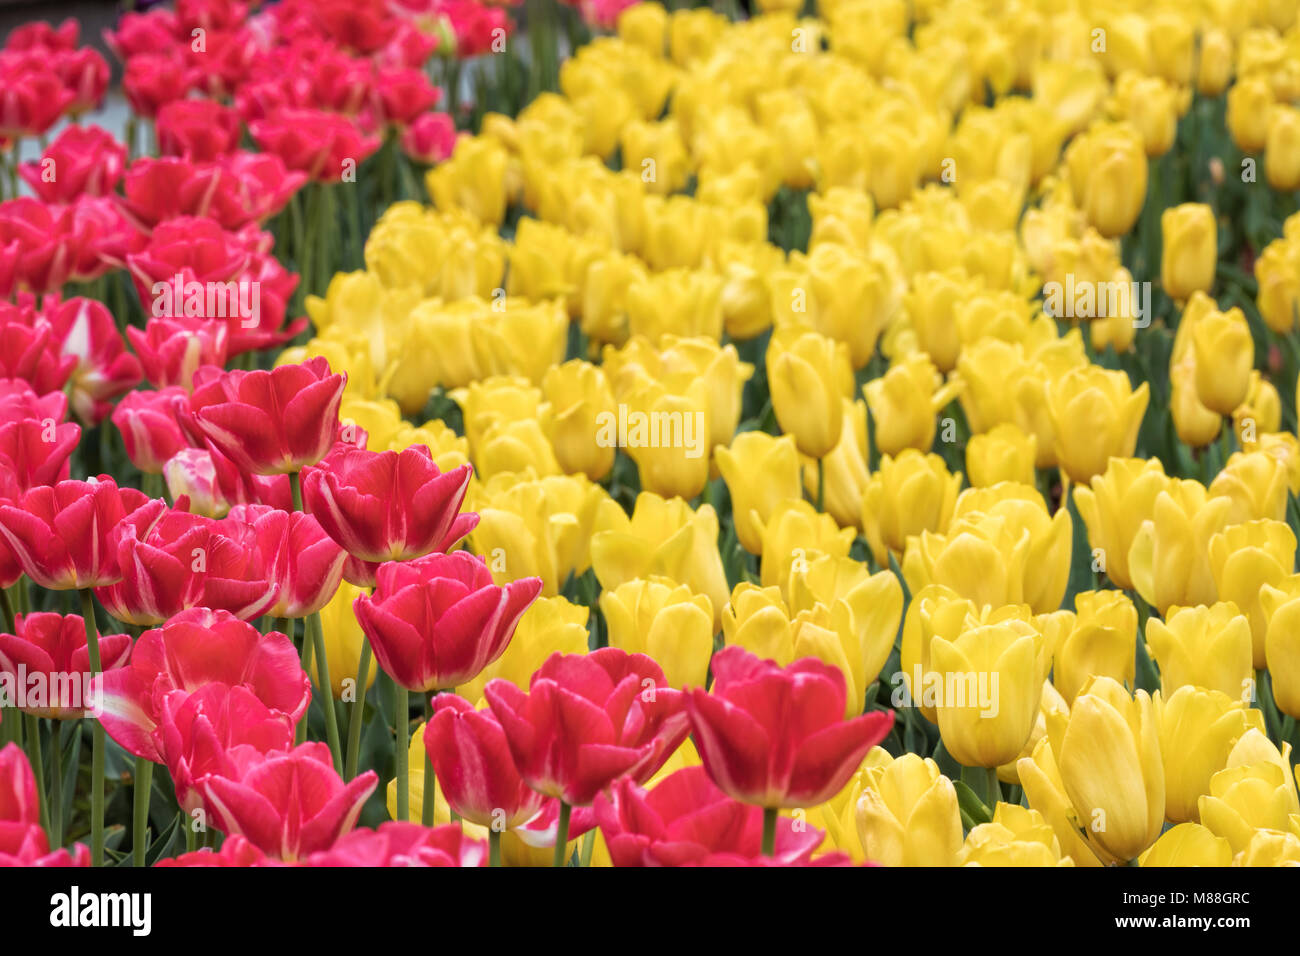 Close up of a field of beautiful pink and yellow tulips Stock Photo